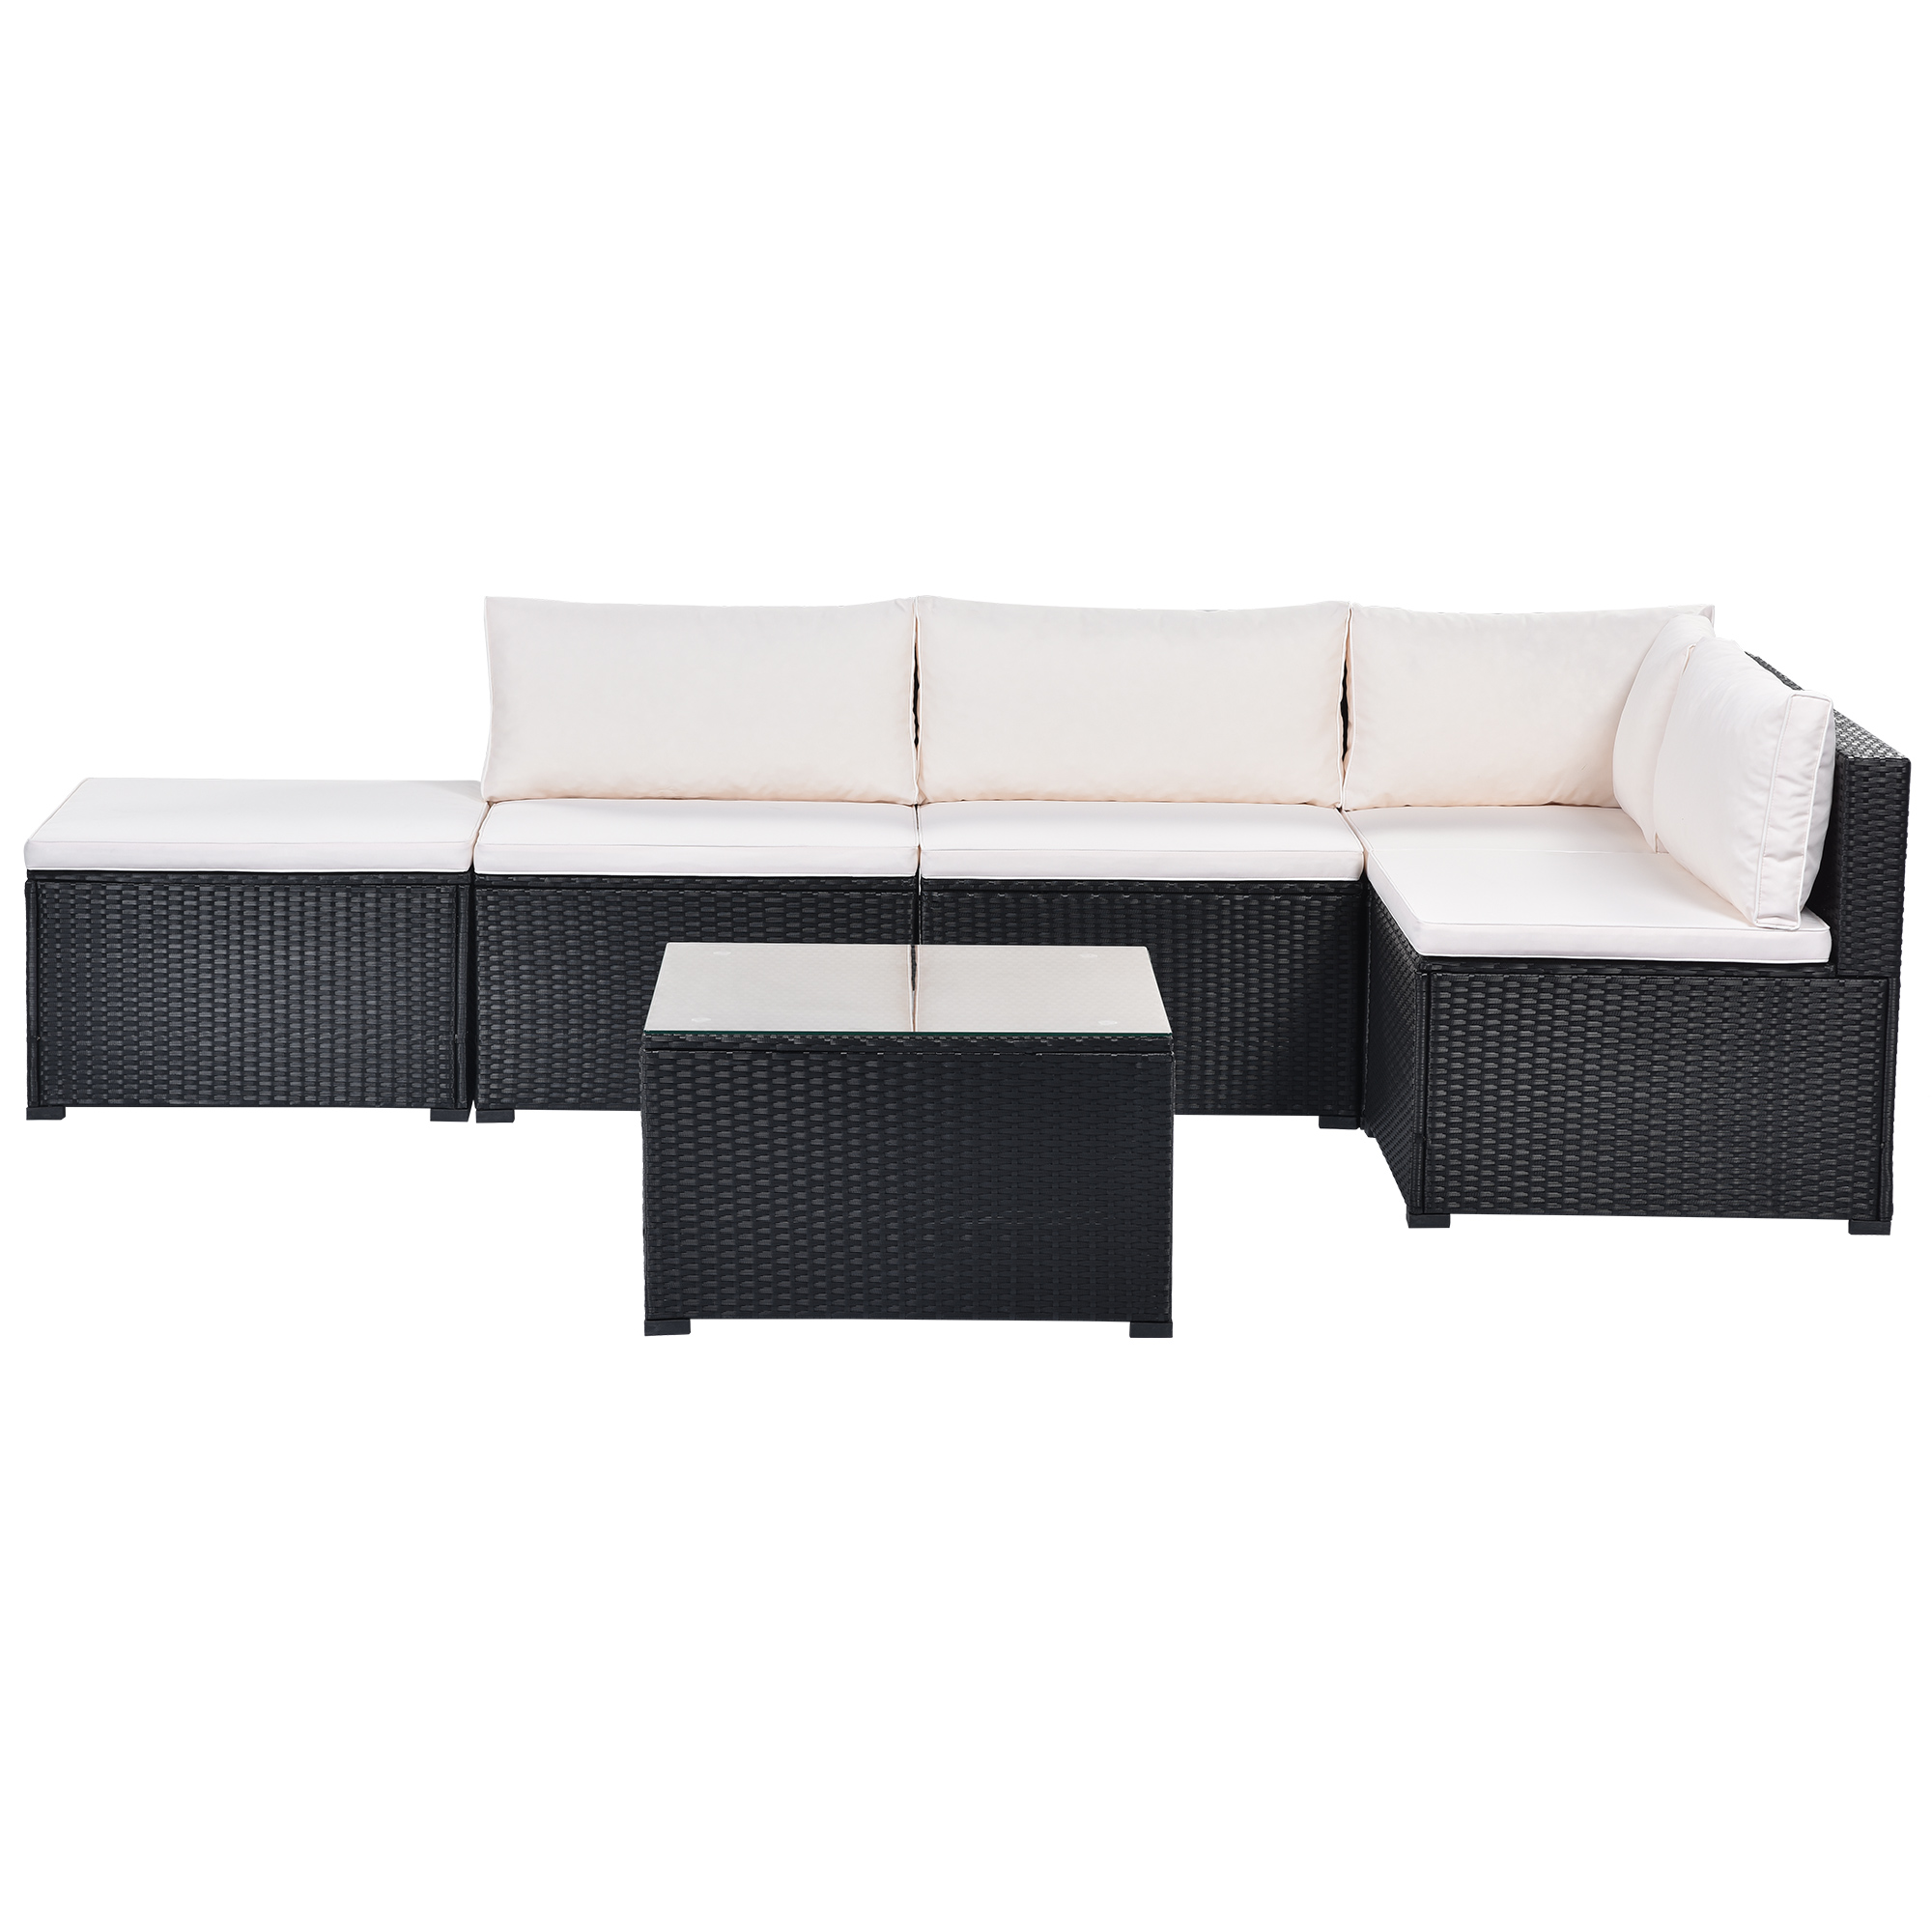 6-Piece Outdoor Furniture Set With PE Rattan Wicker - FG201204AAA